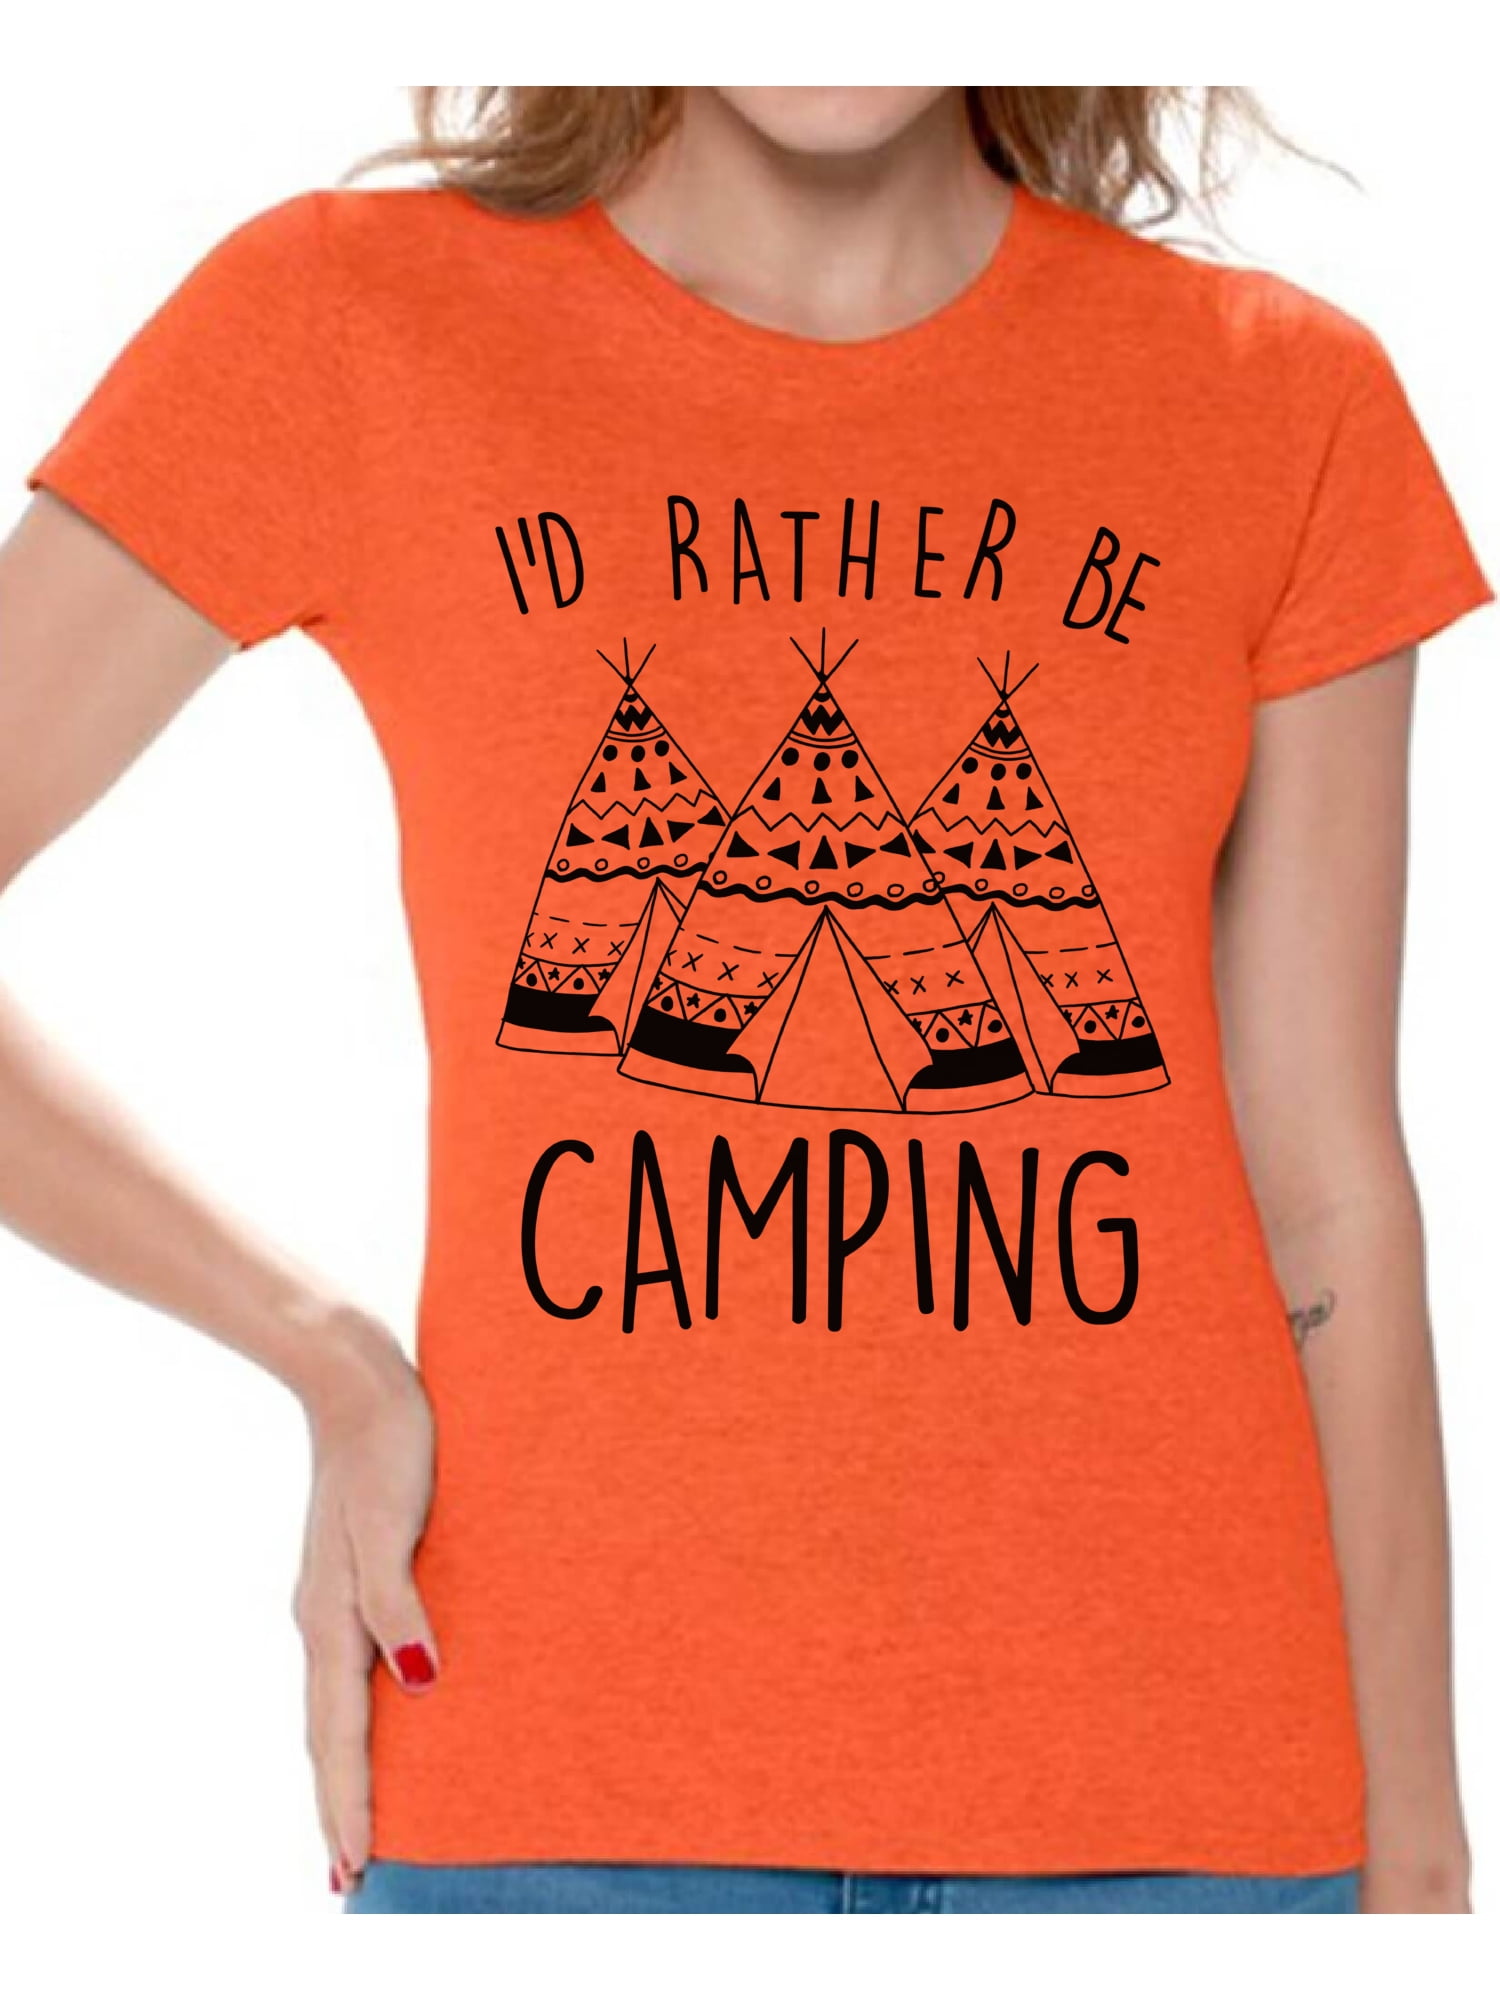 I'd Rather be Camping Kids Shirt I Love Camping. Camper T Shirt for Boys Camping Shirt for Girls Camping Lovers Gifts